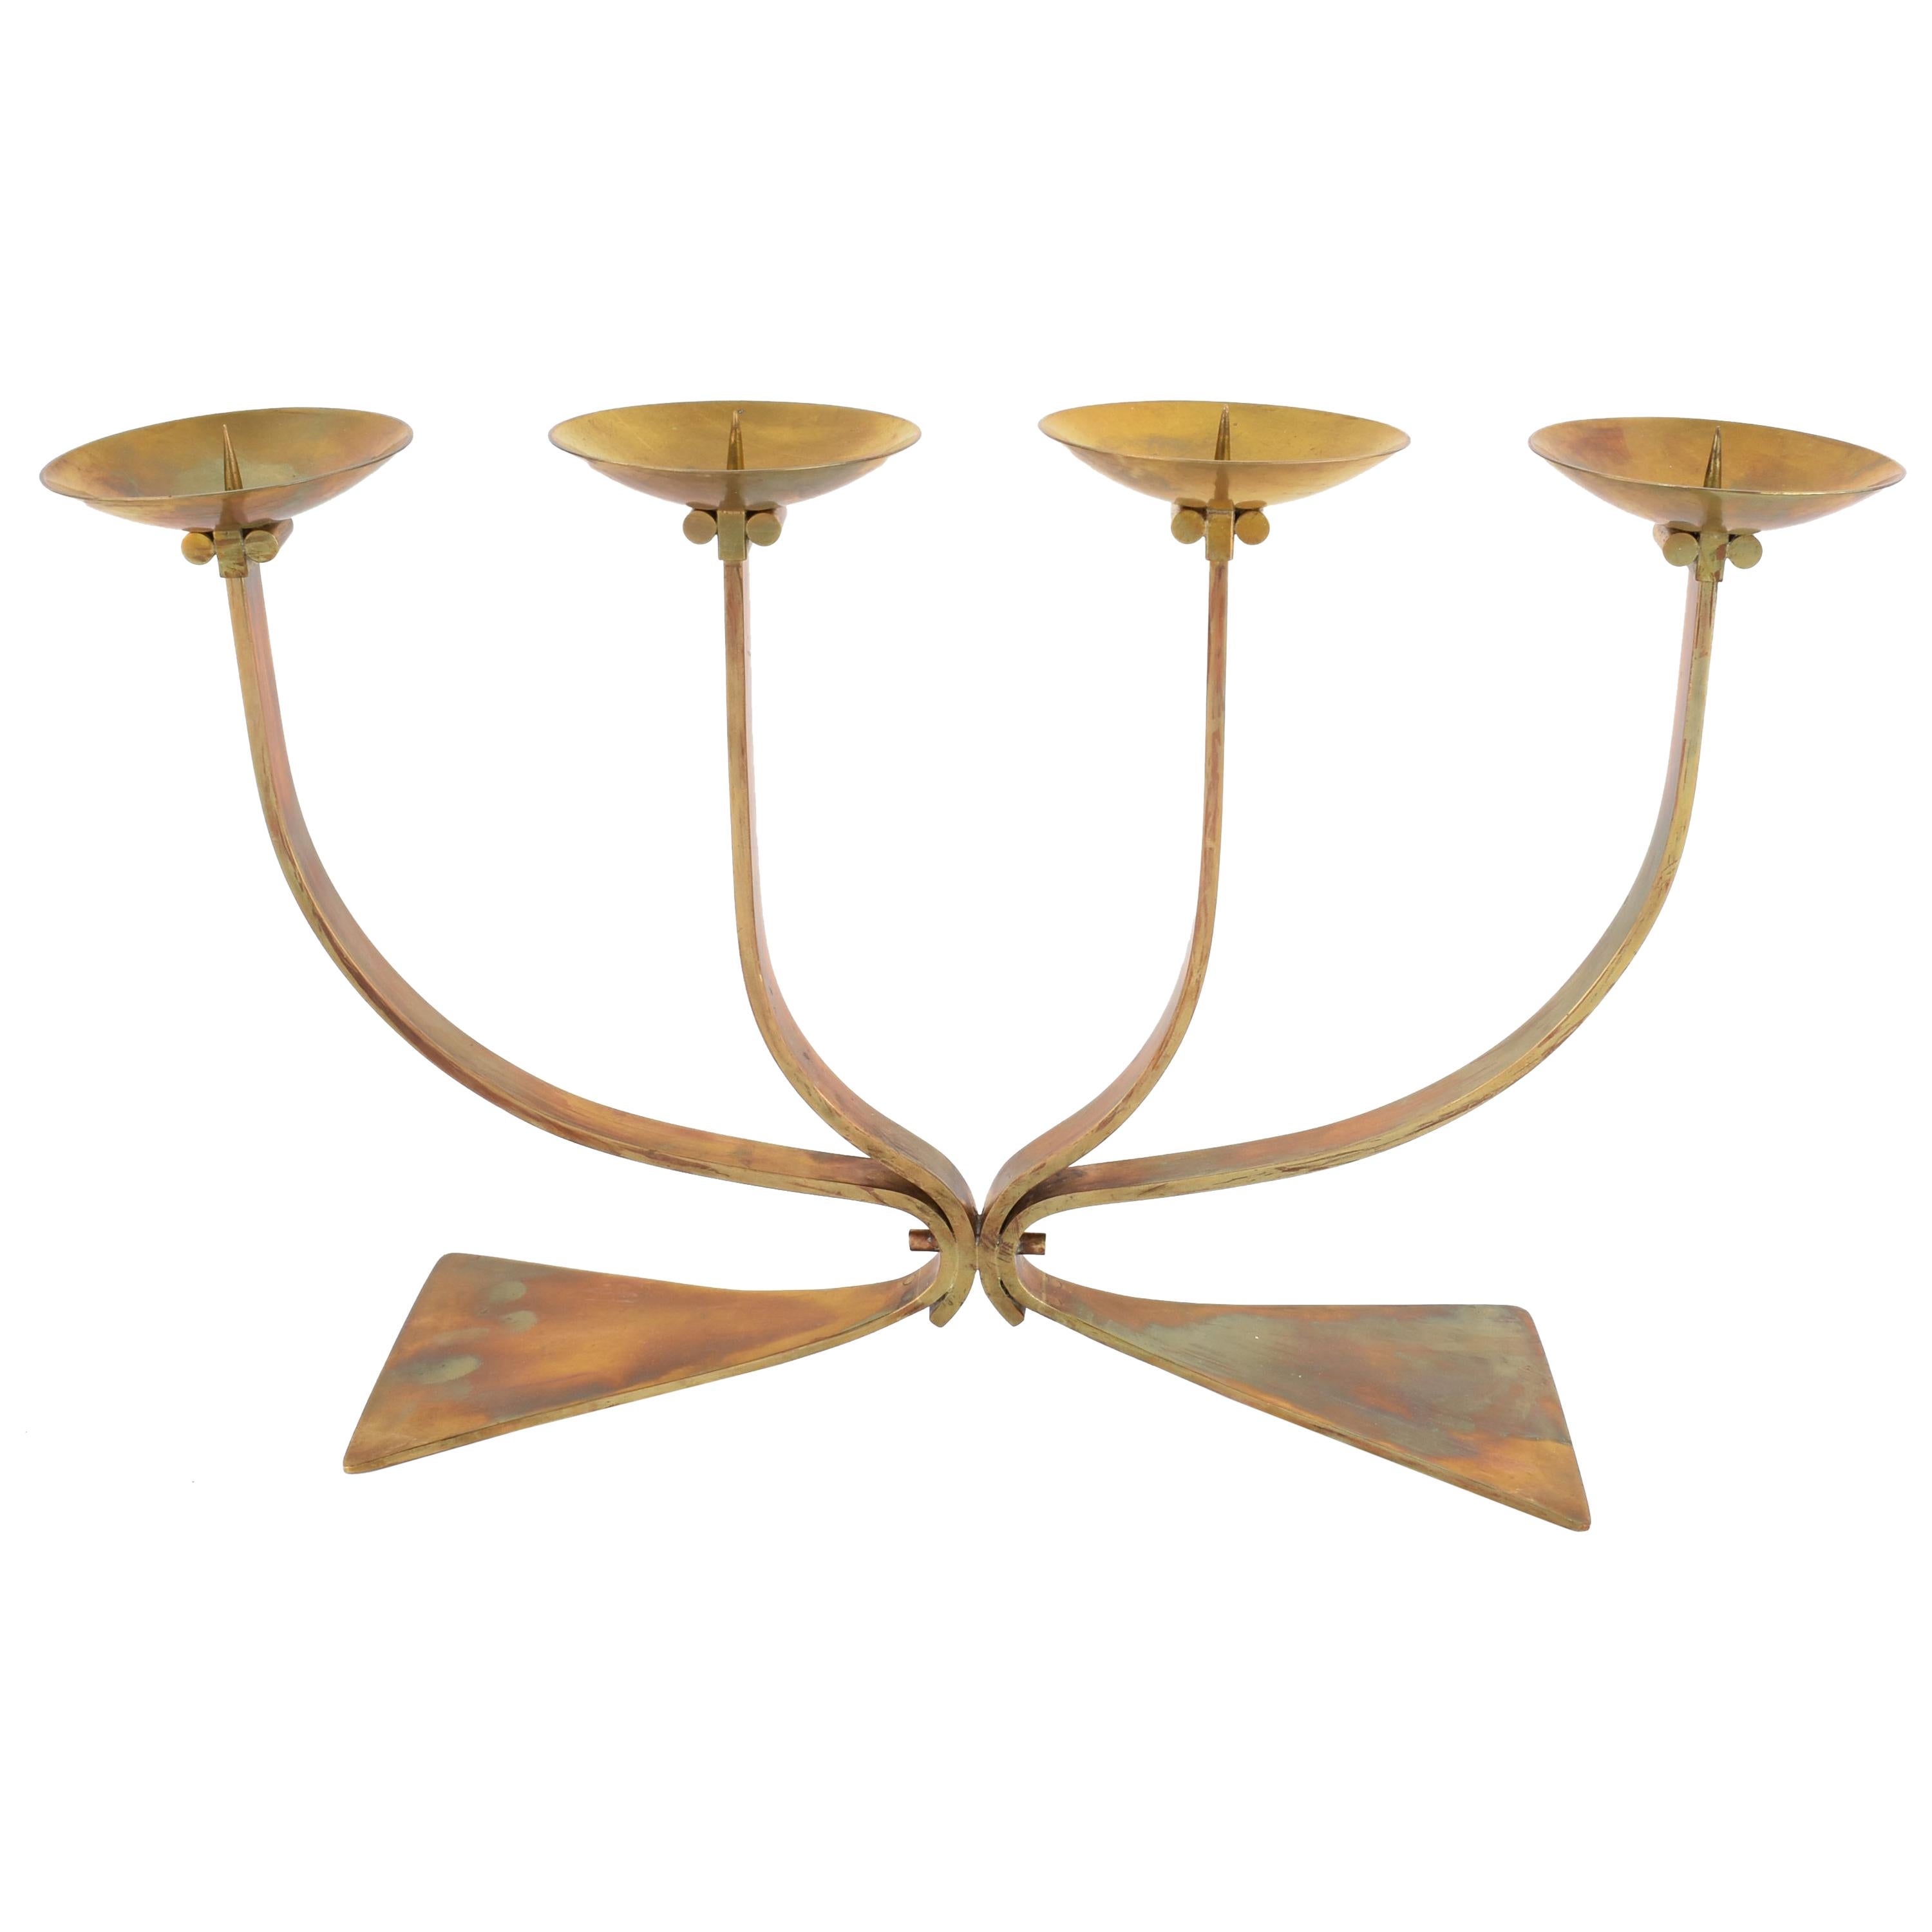 Vintage Candle Holder by Friedrich Bernard Marby, Germany, 1950s-1960s